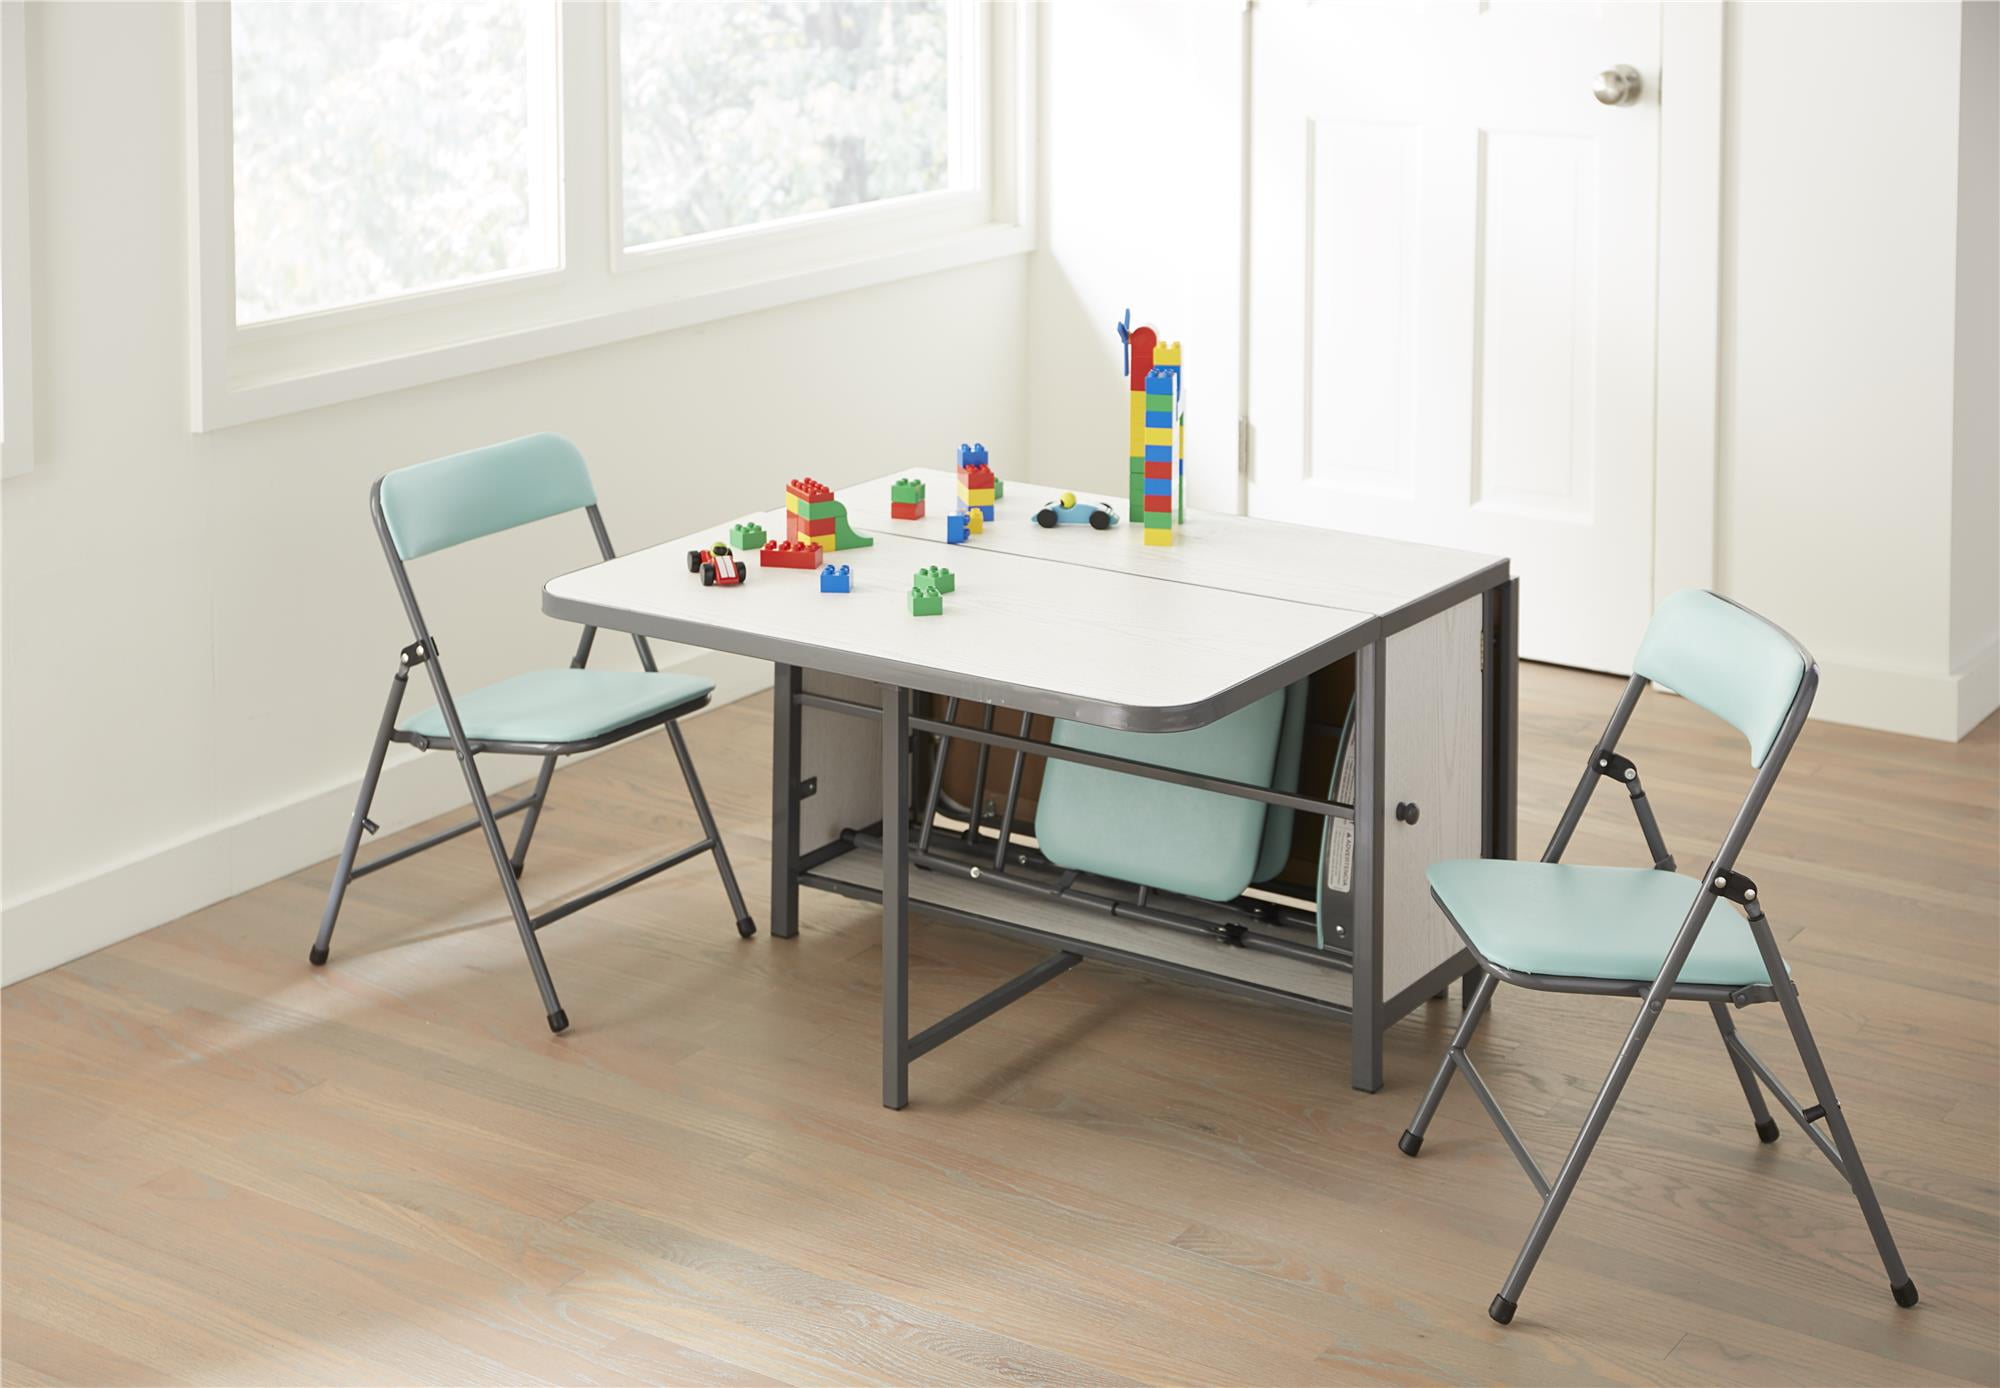  How To Set Up Cosco Folding Table for Streamer